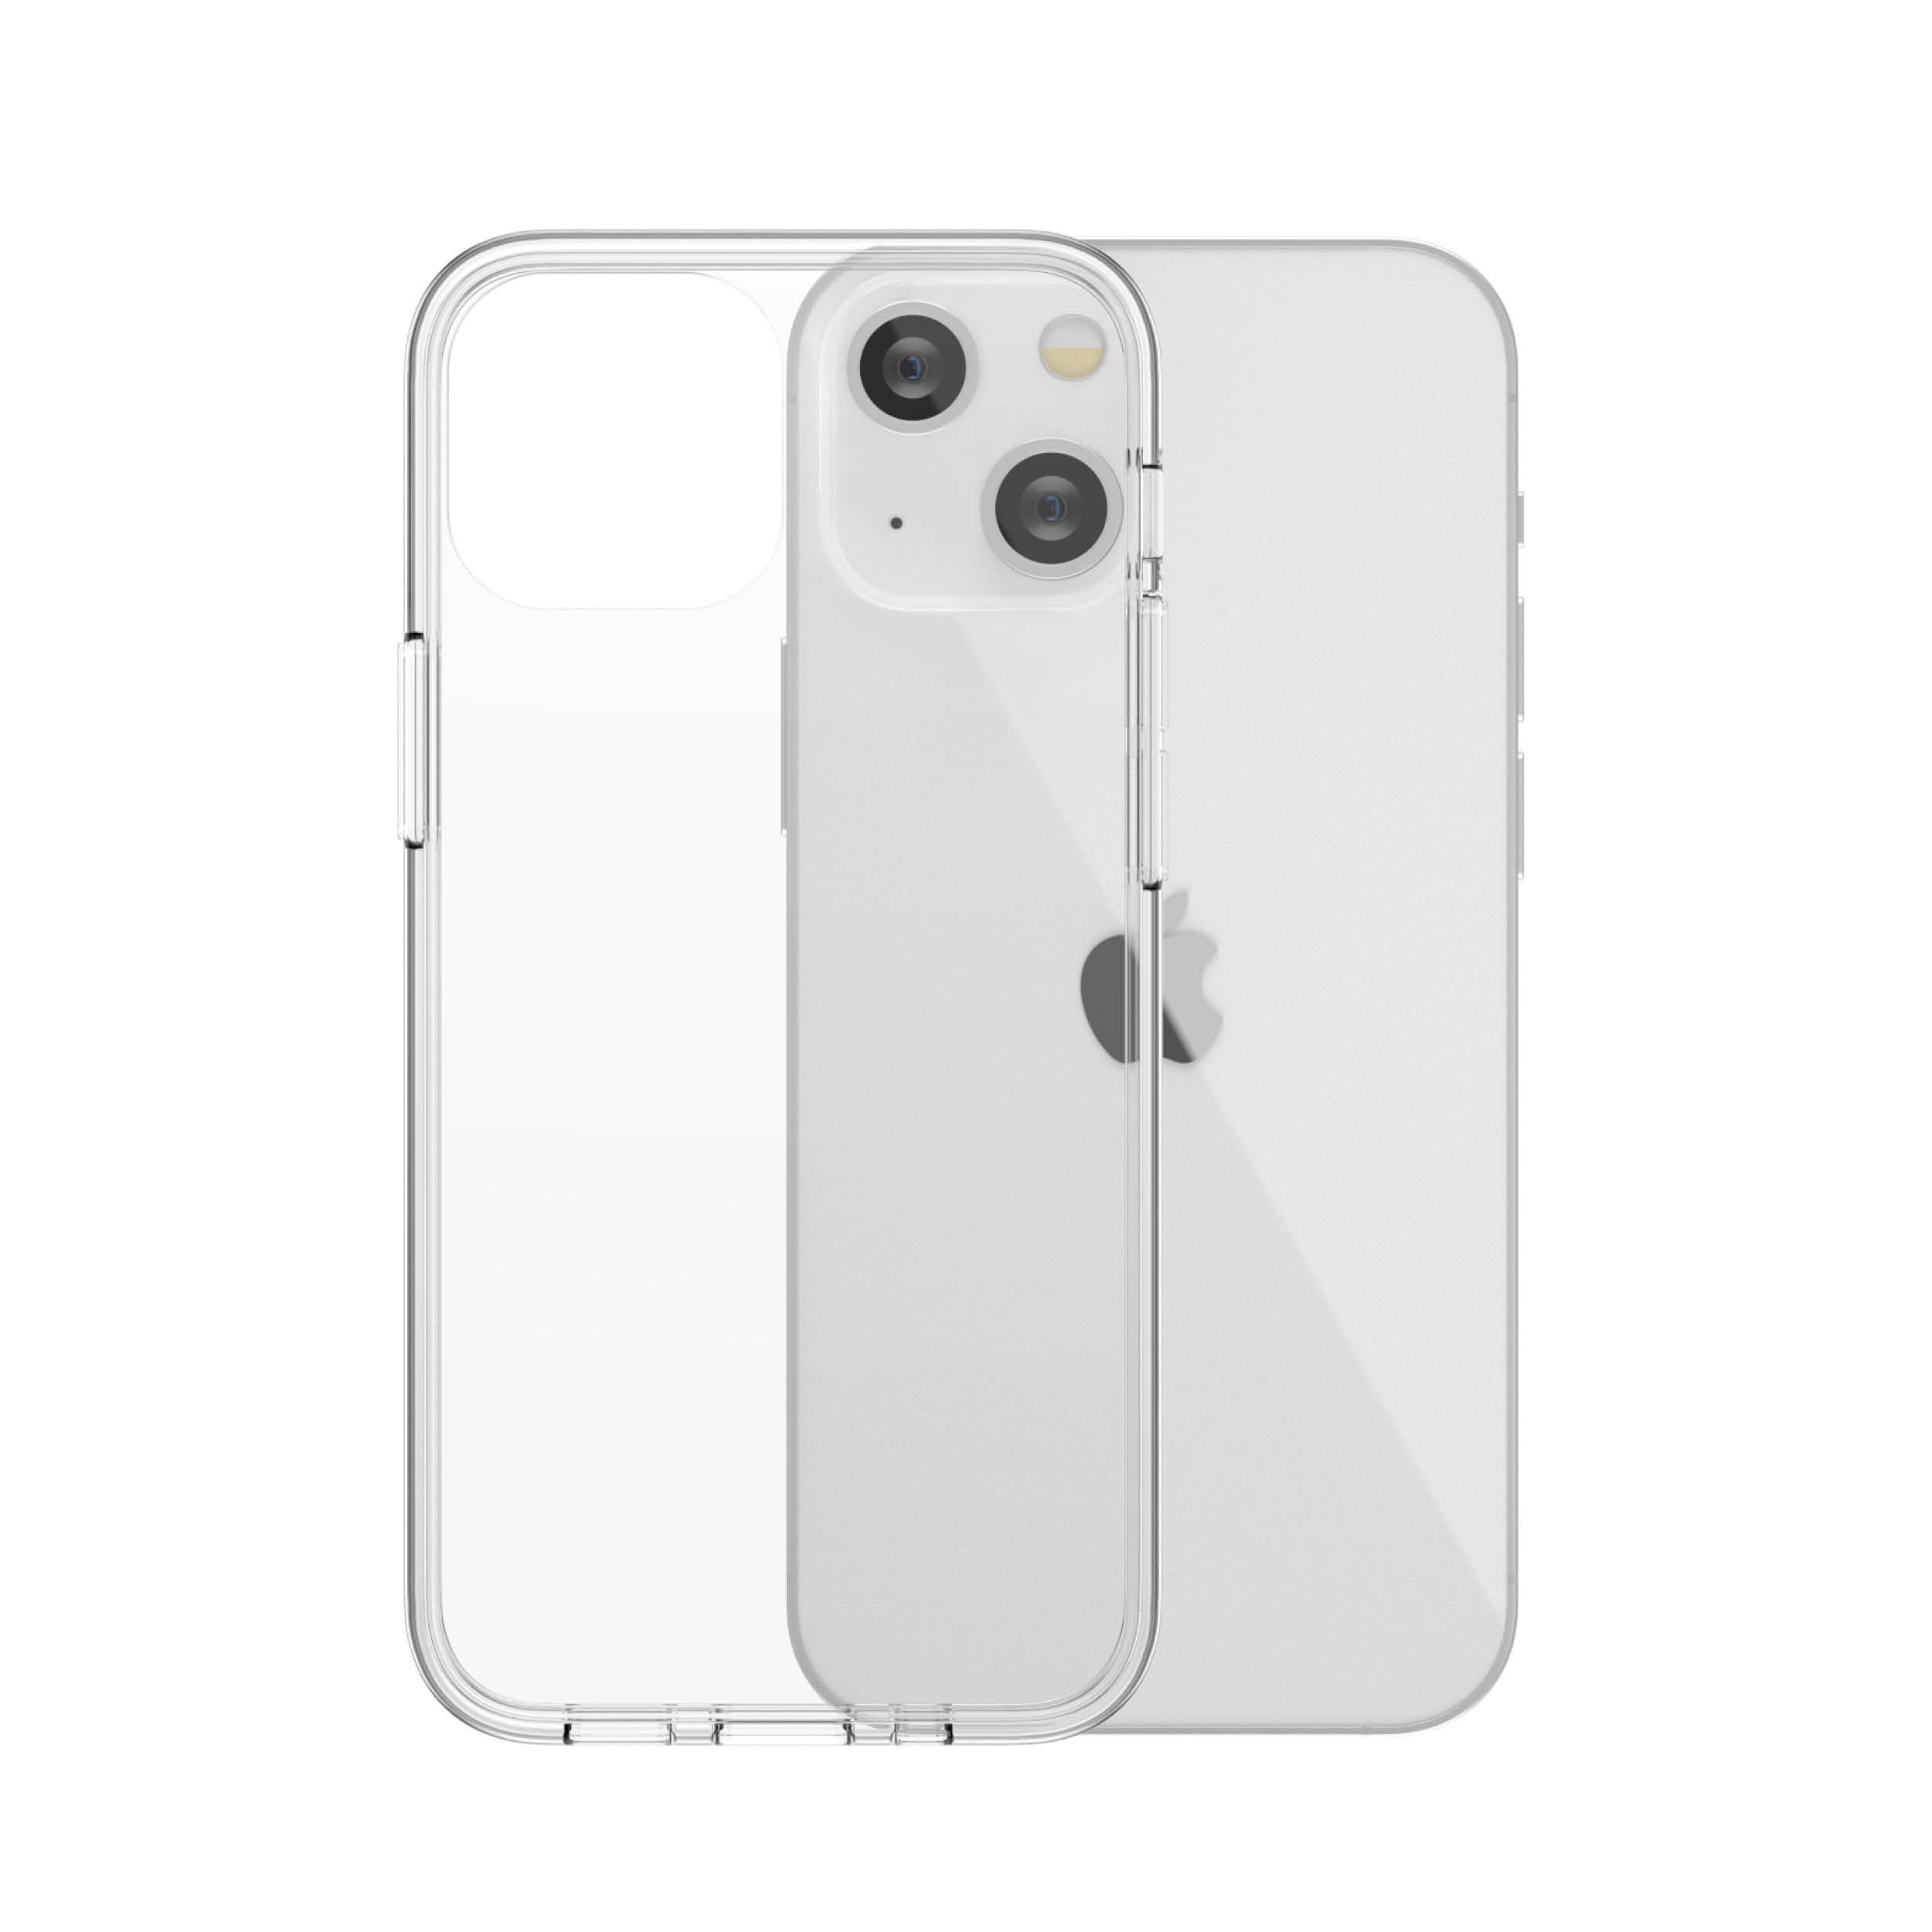 MINI, CLEAR Backcover, IPHONE ClearCase, 13 PANZERGLASS APPLE,